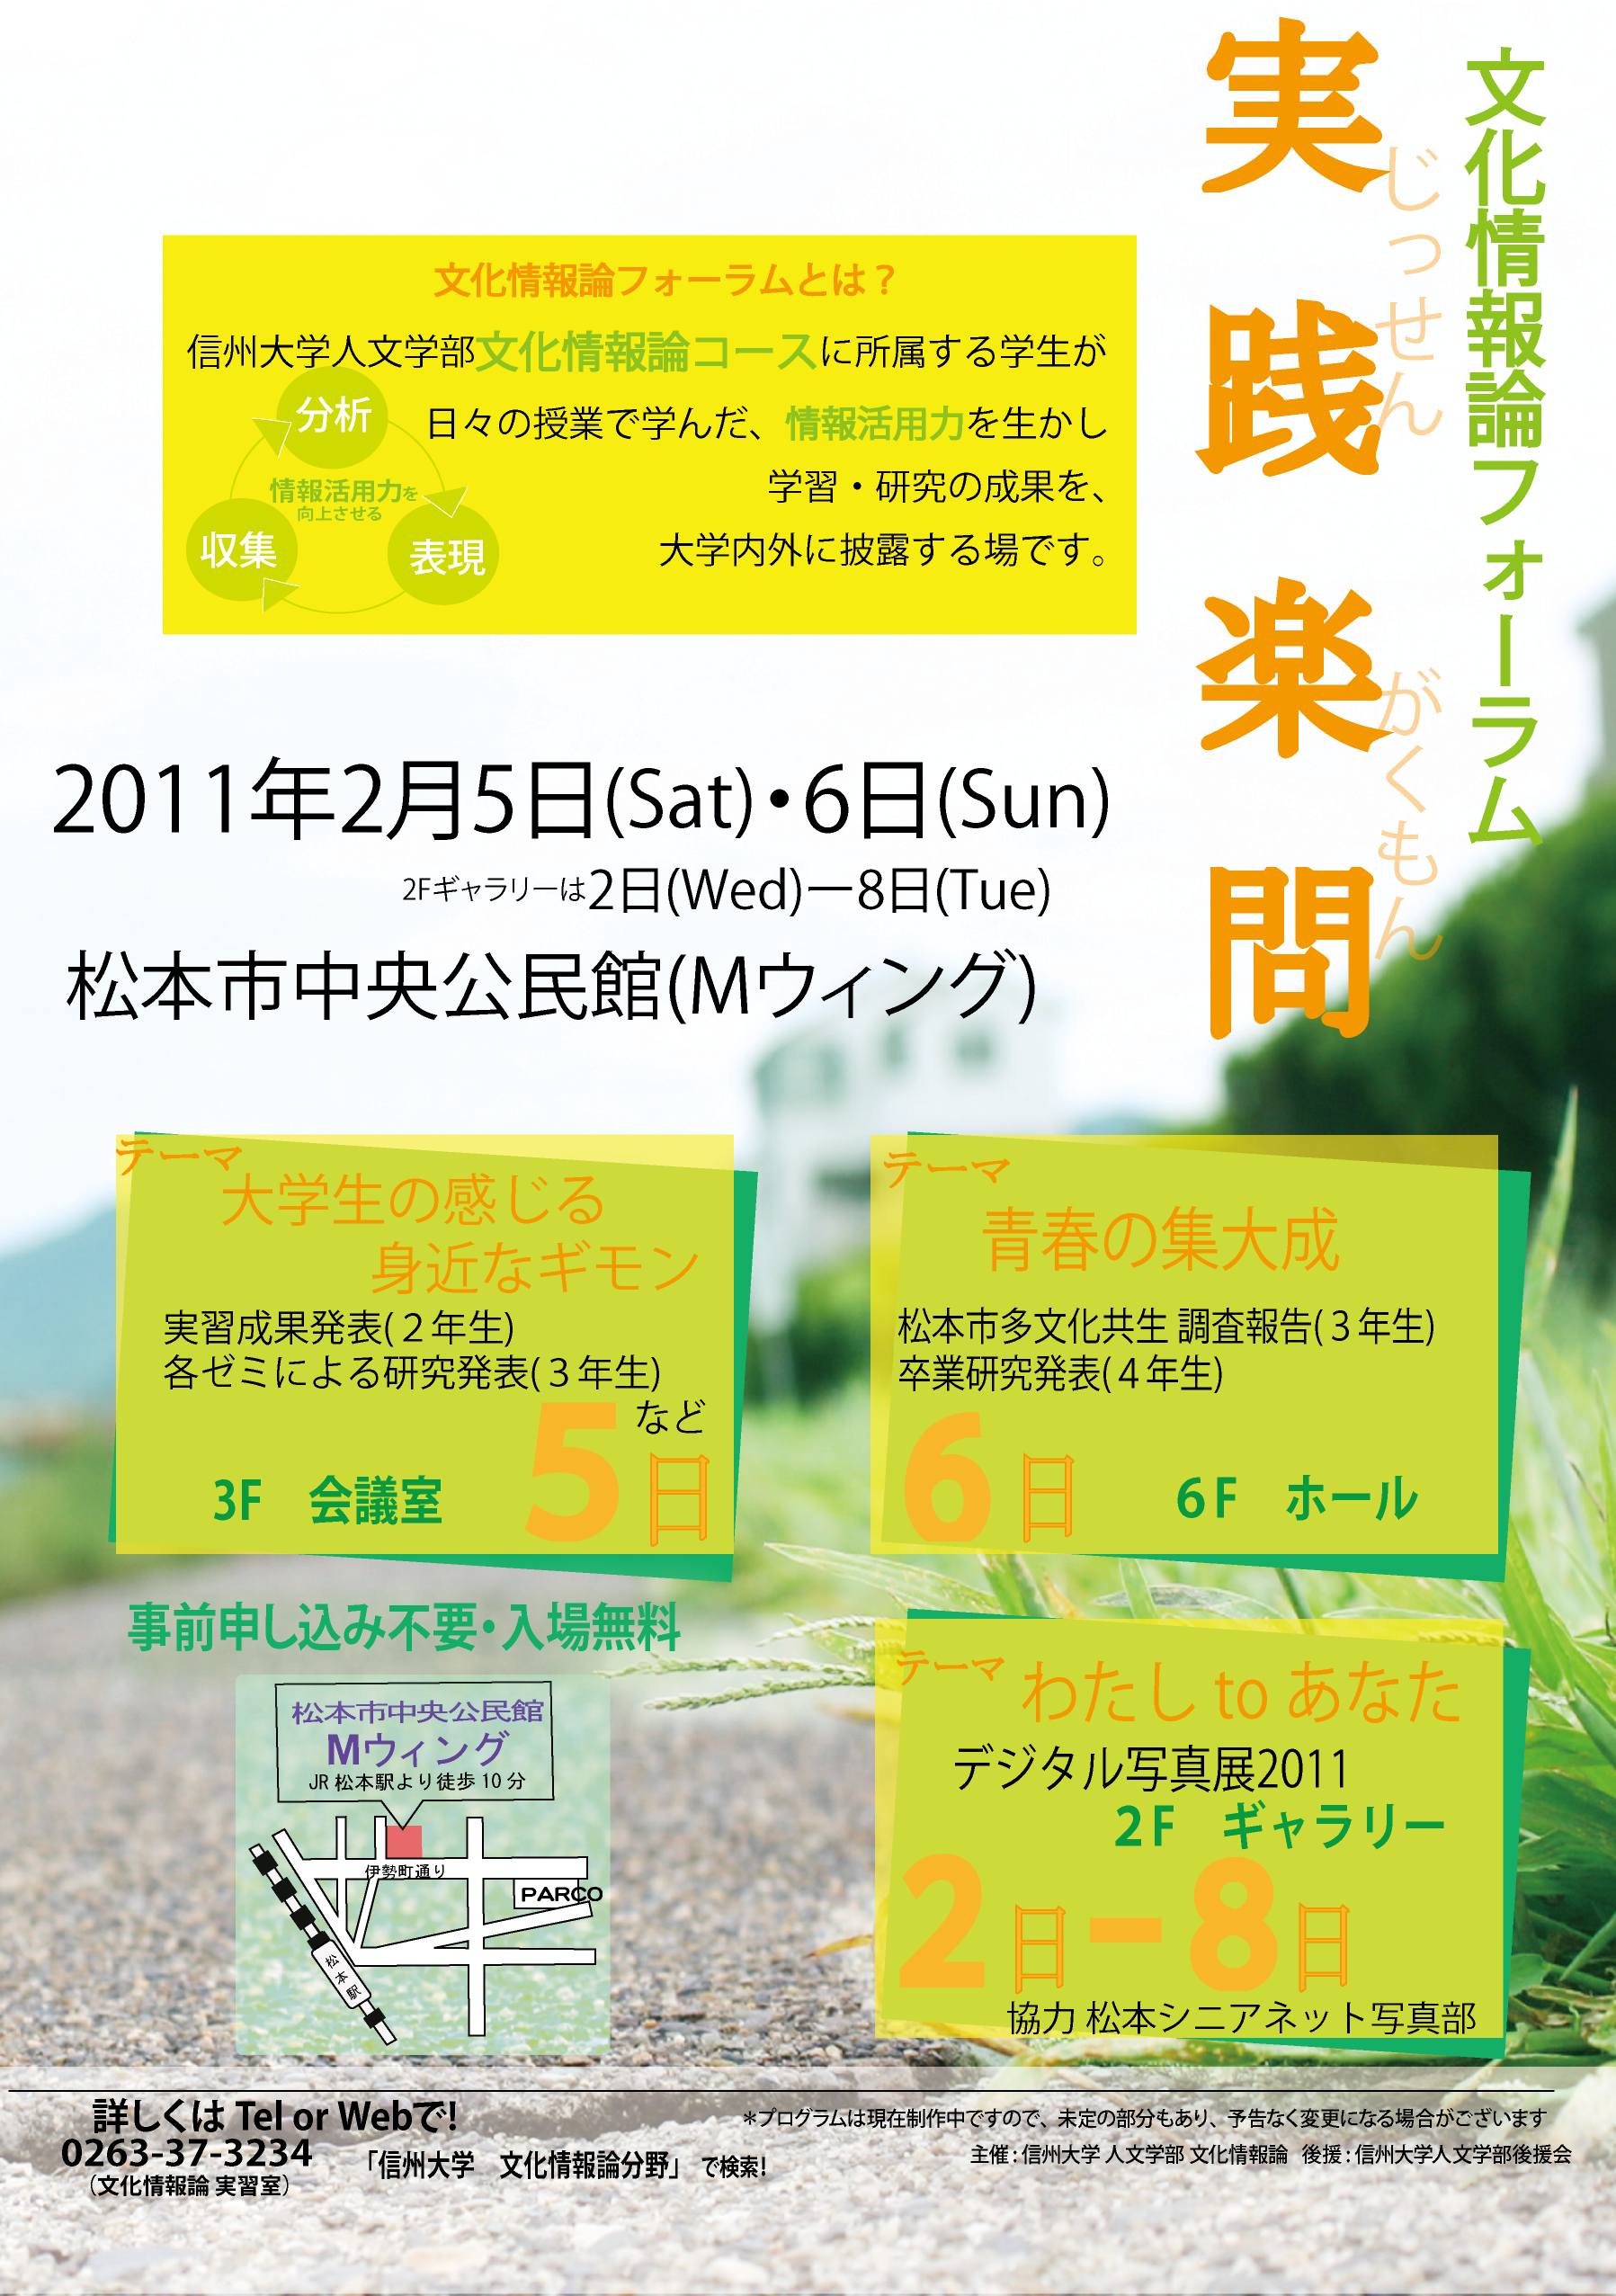 http://www.shinshu-u.ac.jp/faculty/arts/course/in-culture/images/1224%20poster.png